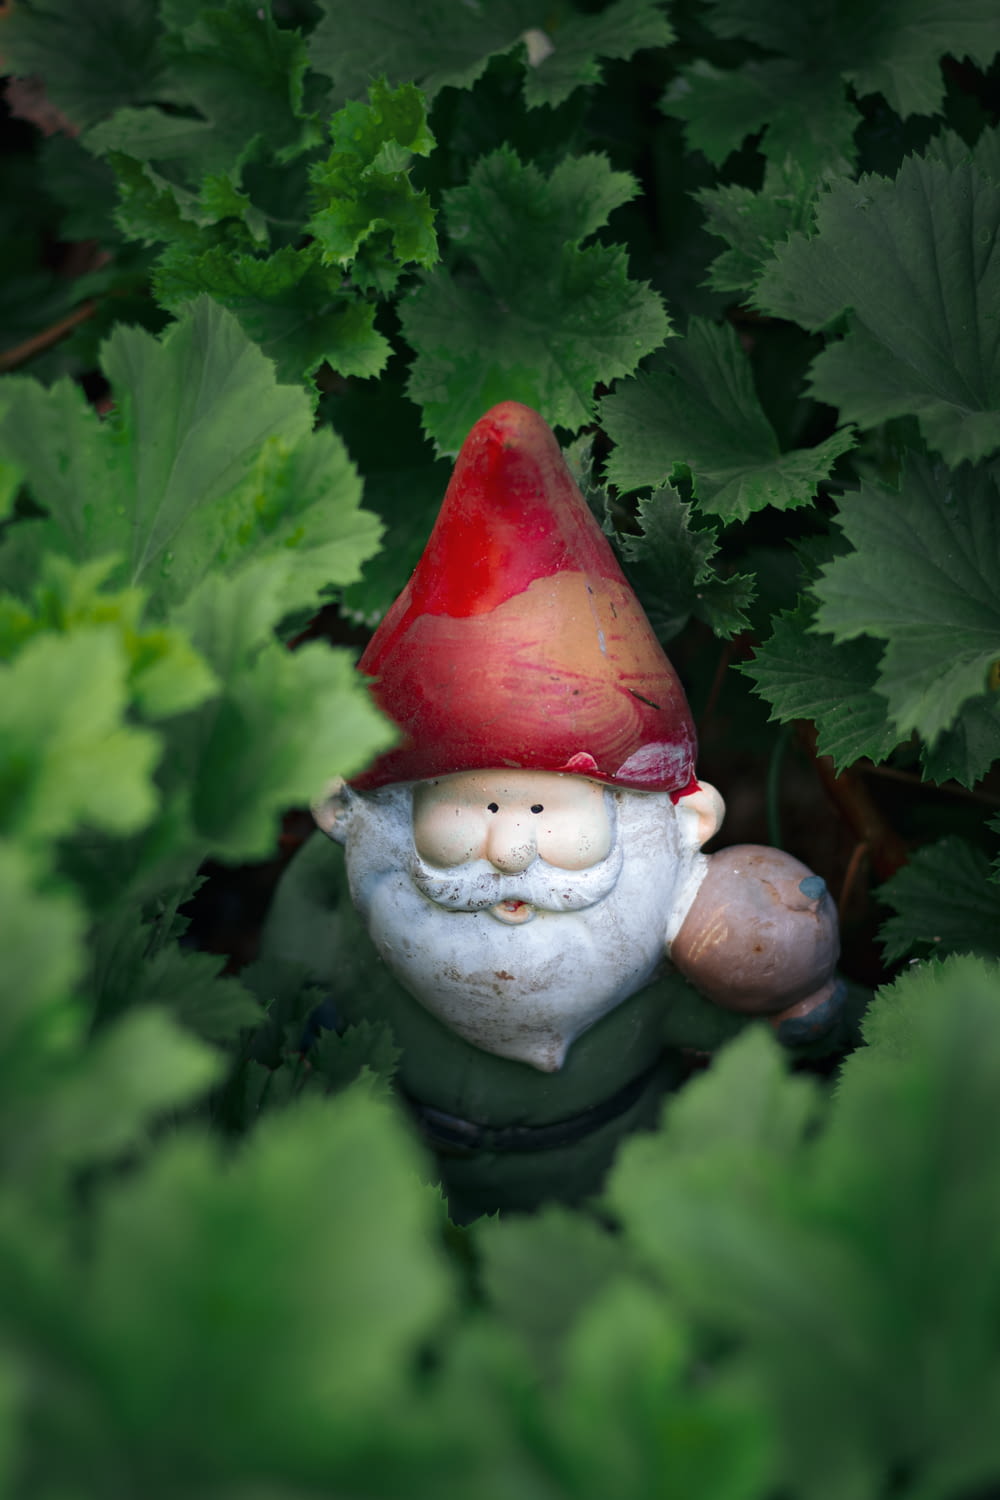 a garden gnome sitting in the middle of a garden